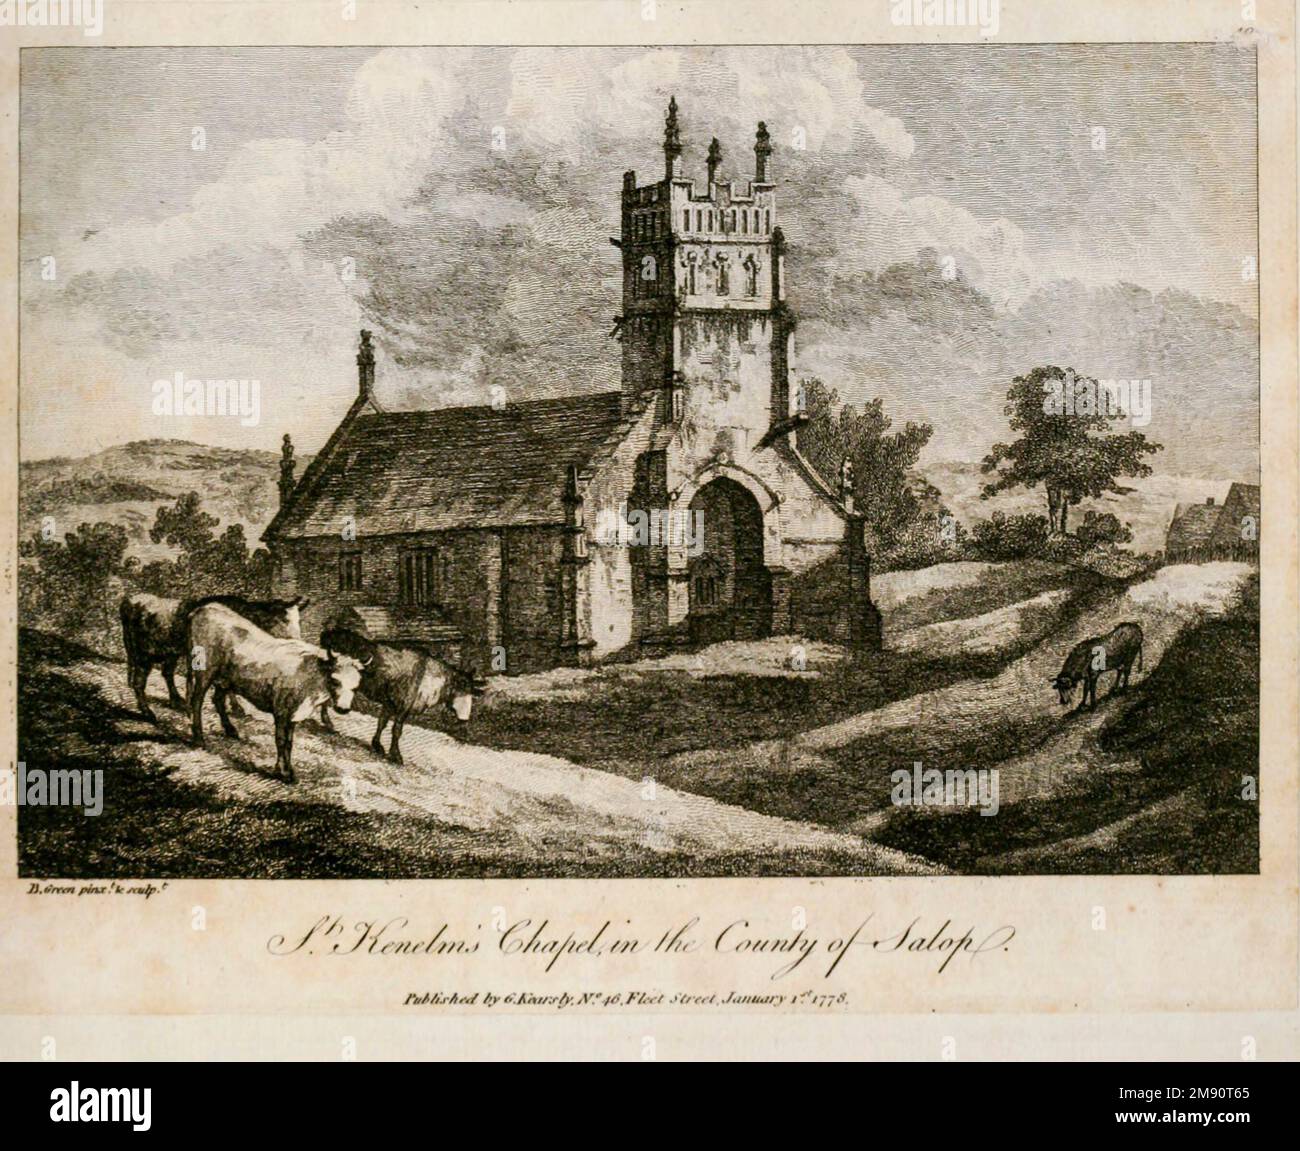 St. Kenelm's Chapel in the County of Salop (Shropshire) from the book ' Supplement to the antiquities of England and Wales ' by Francis Grose, Publication date 1777 Stock Photo